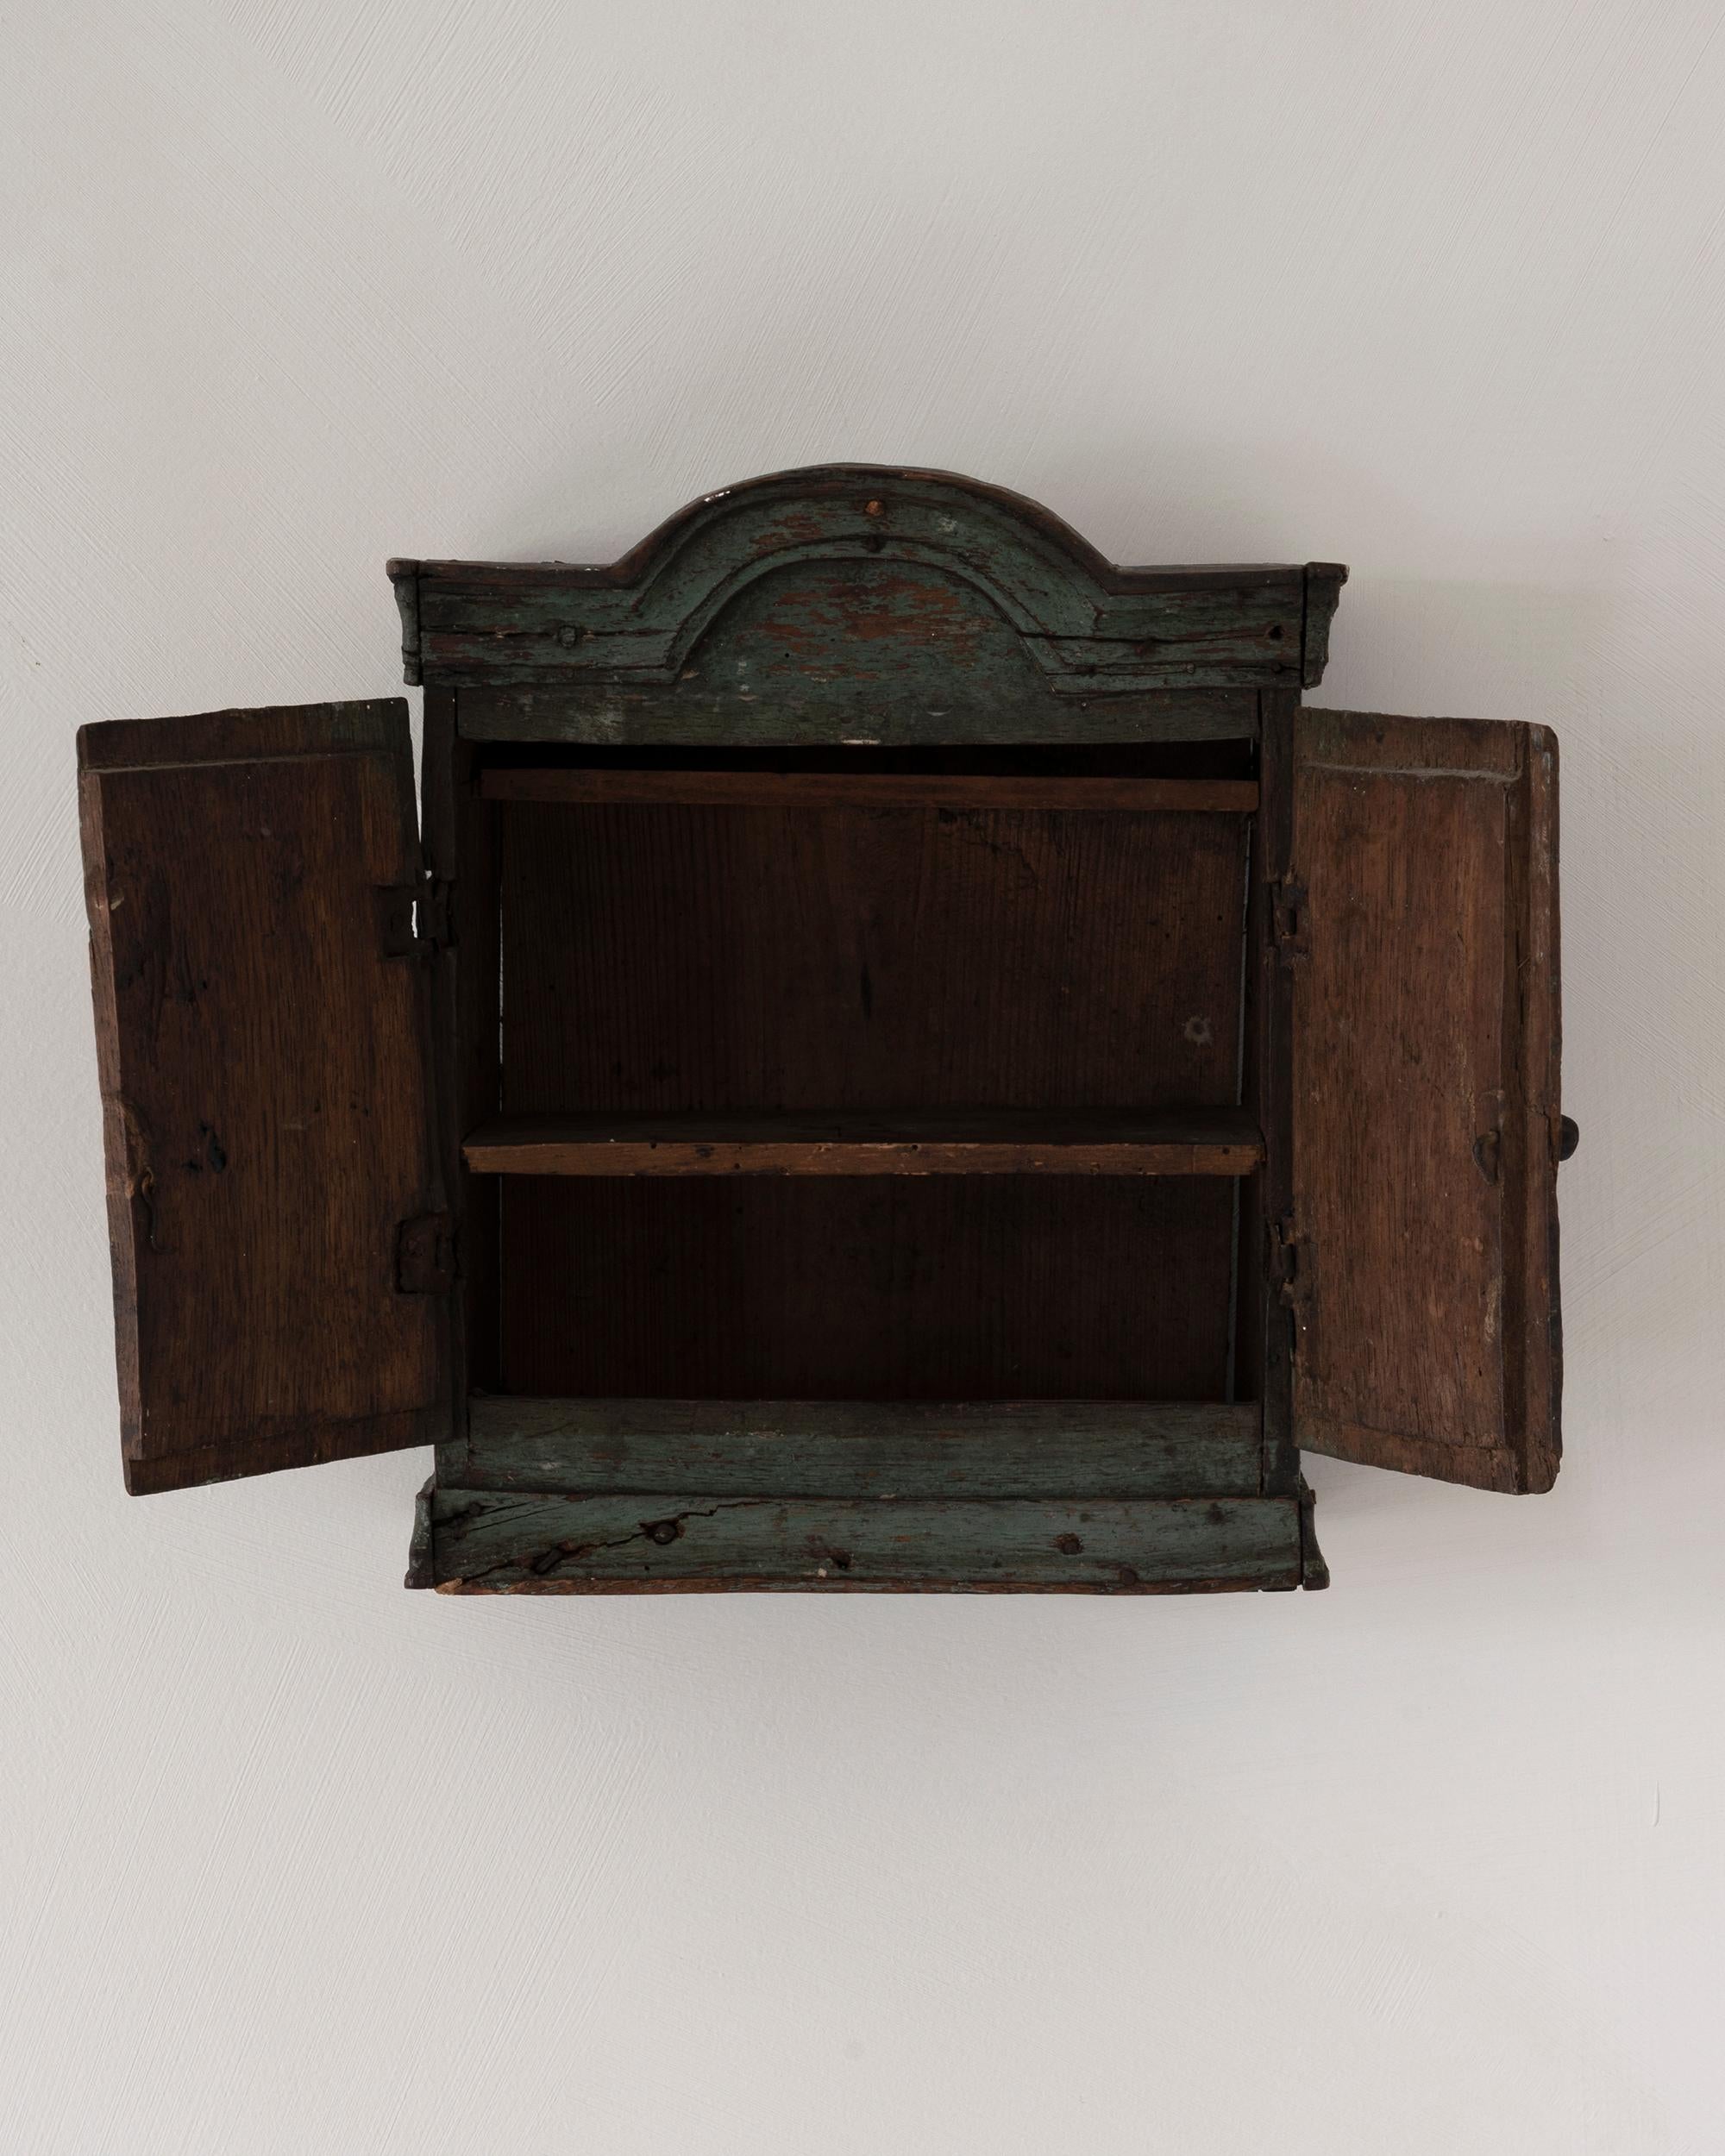 Rare Early 19th Century Swedish Provincial Wall Cupboard In Good Condition For Sale In Mjöhult, SE